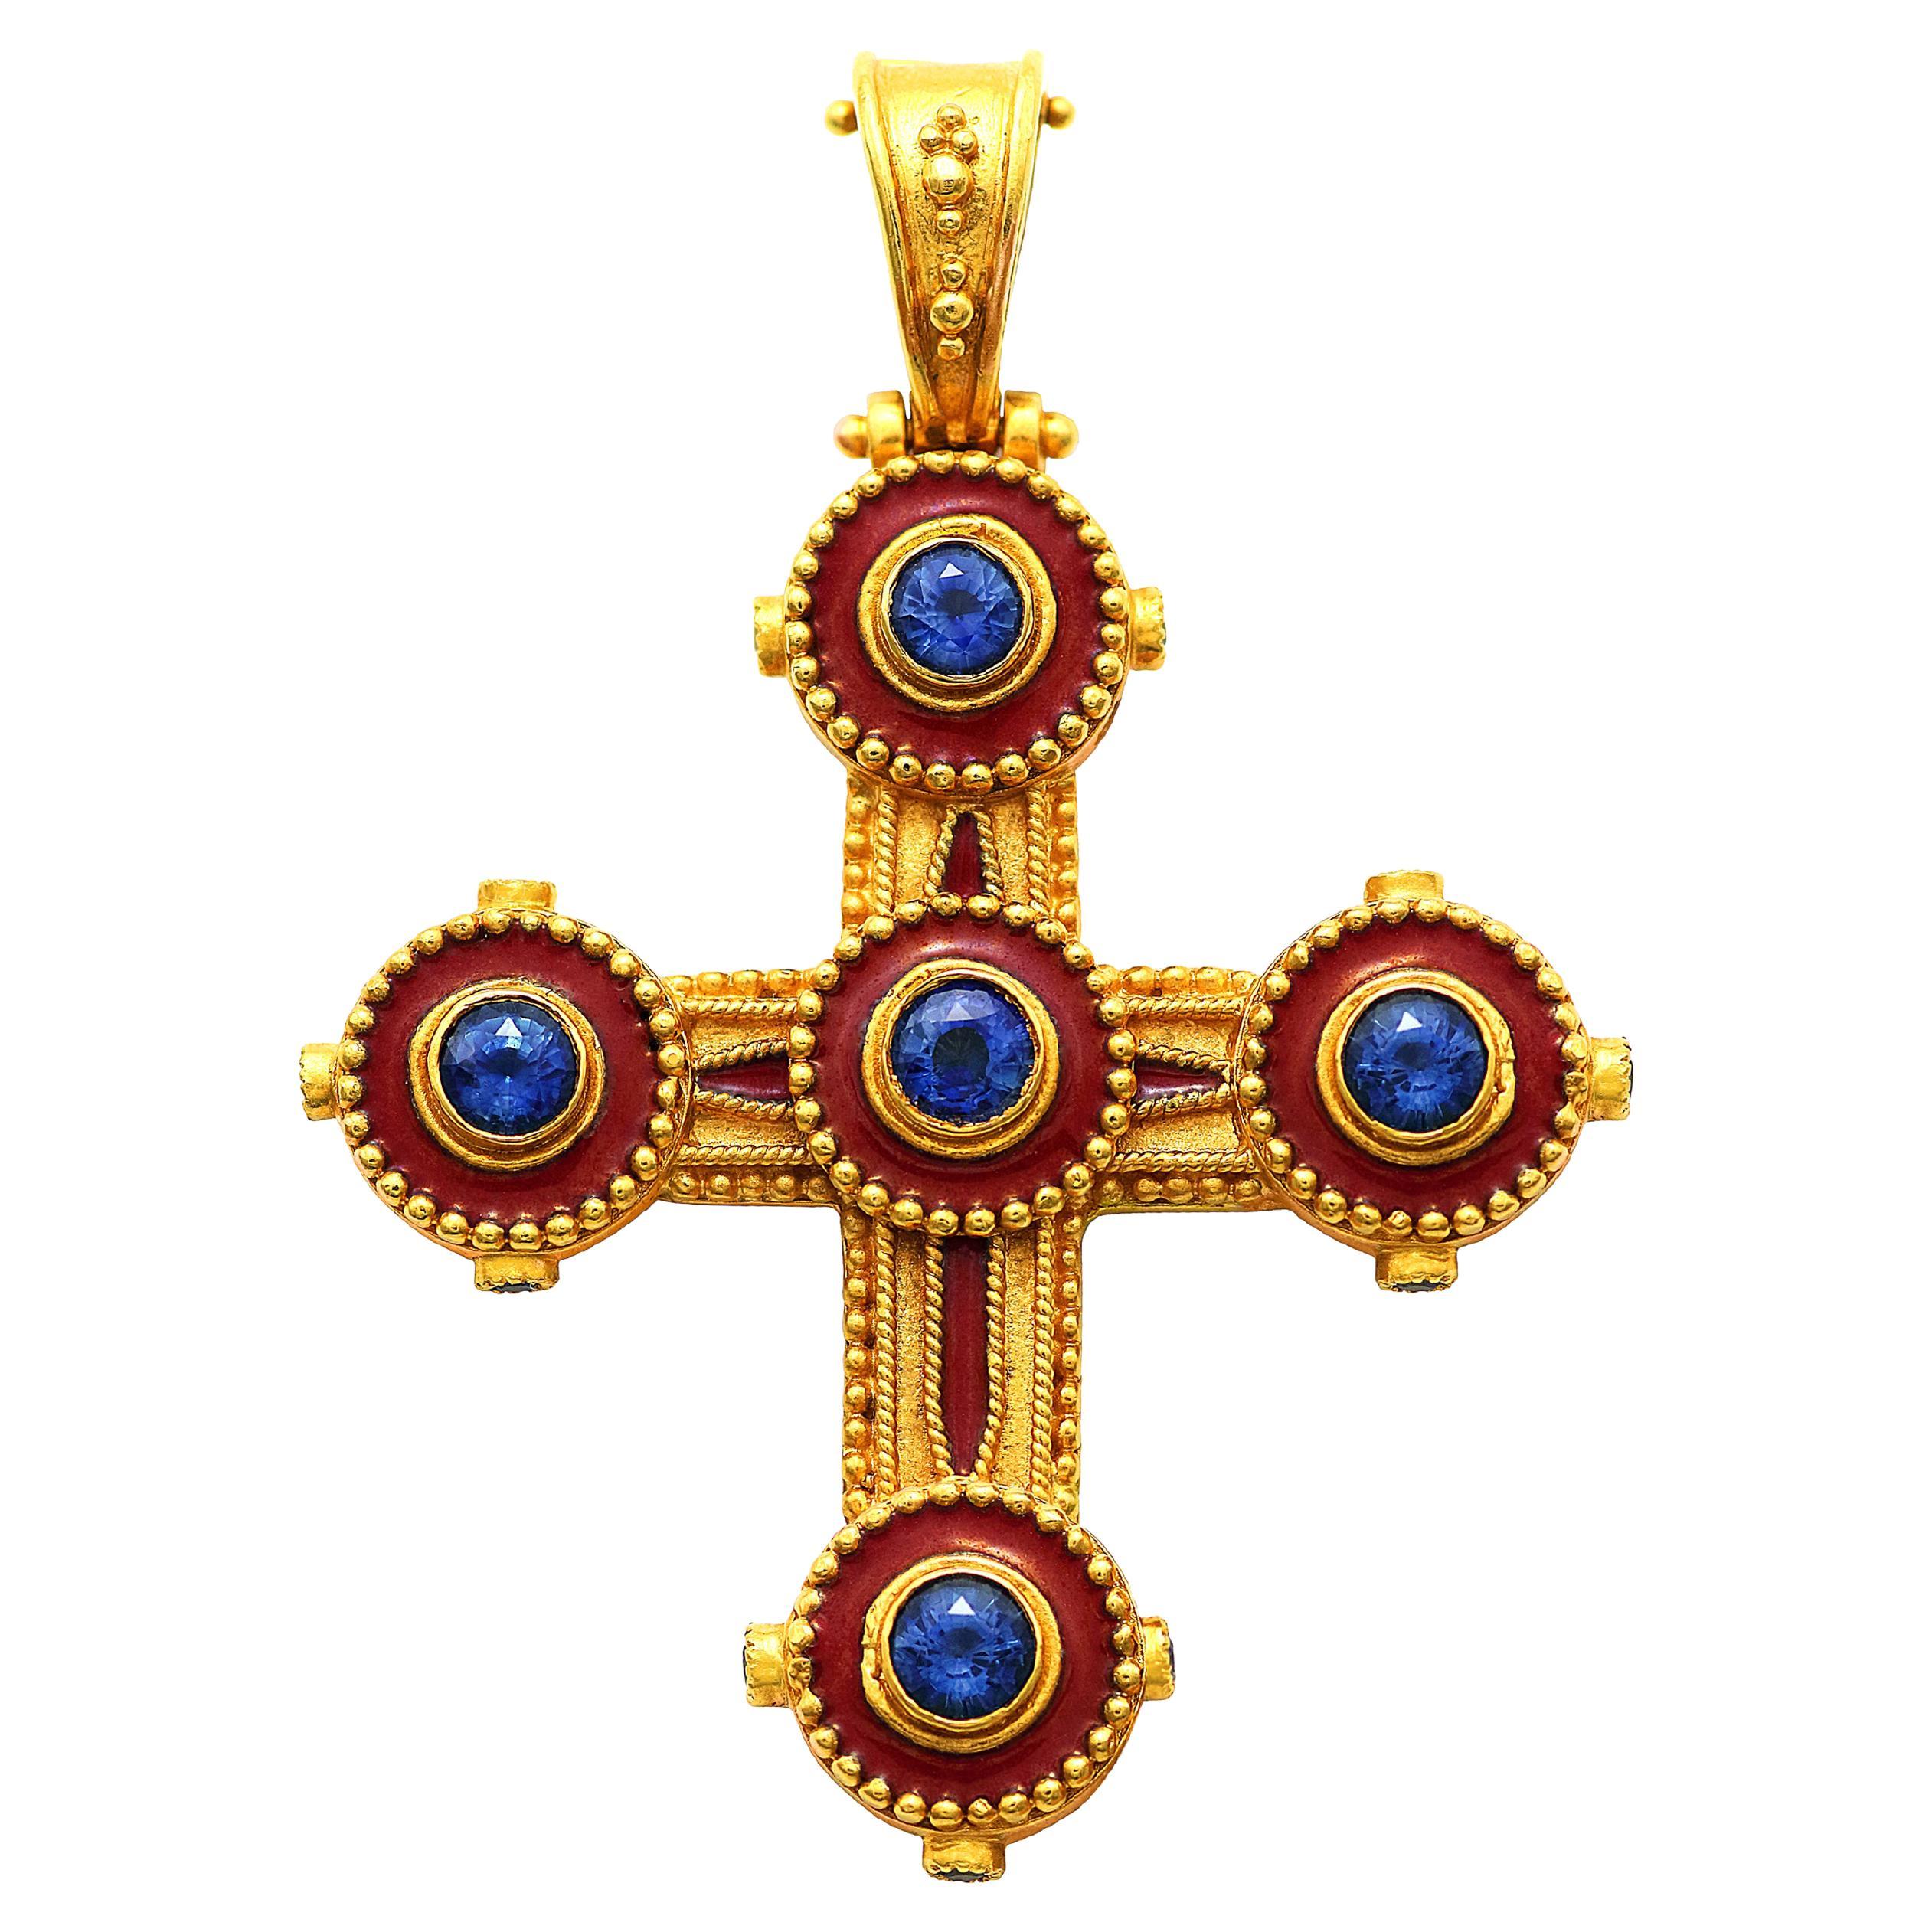 Dimos 18k Gold Byzantine Cross with Enamel and Sapphires